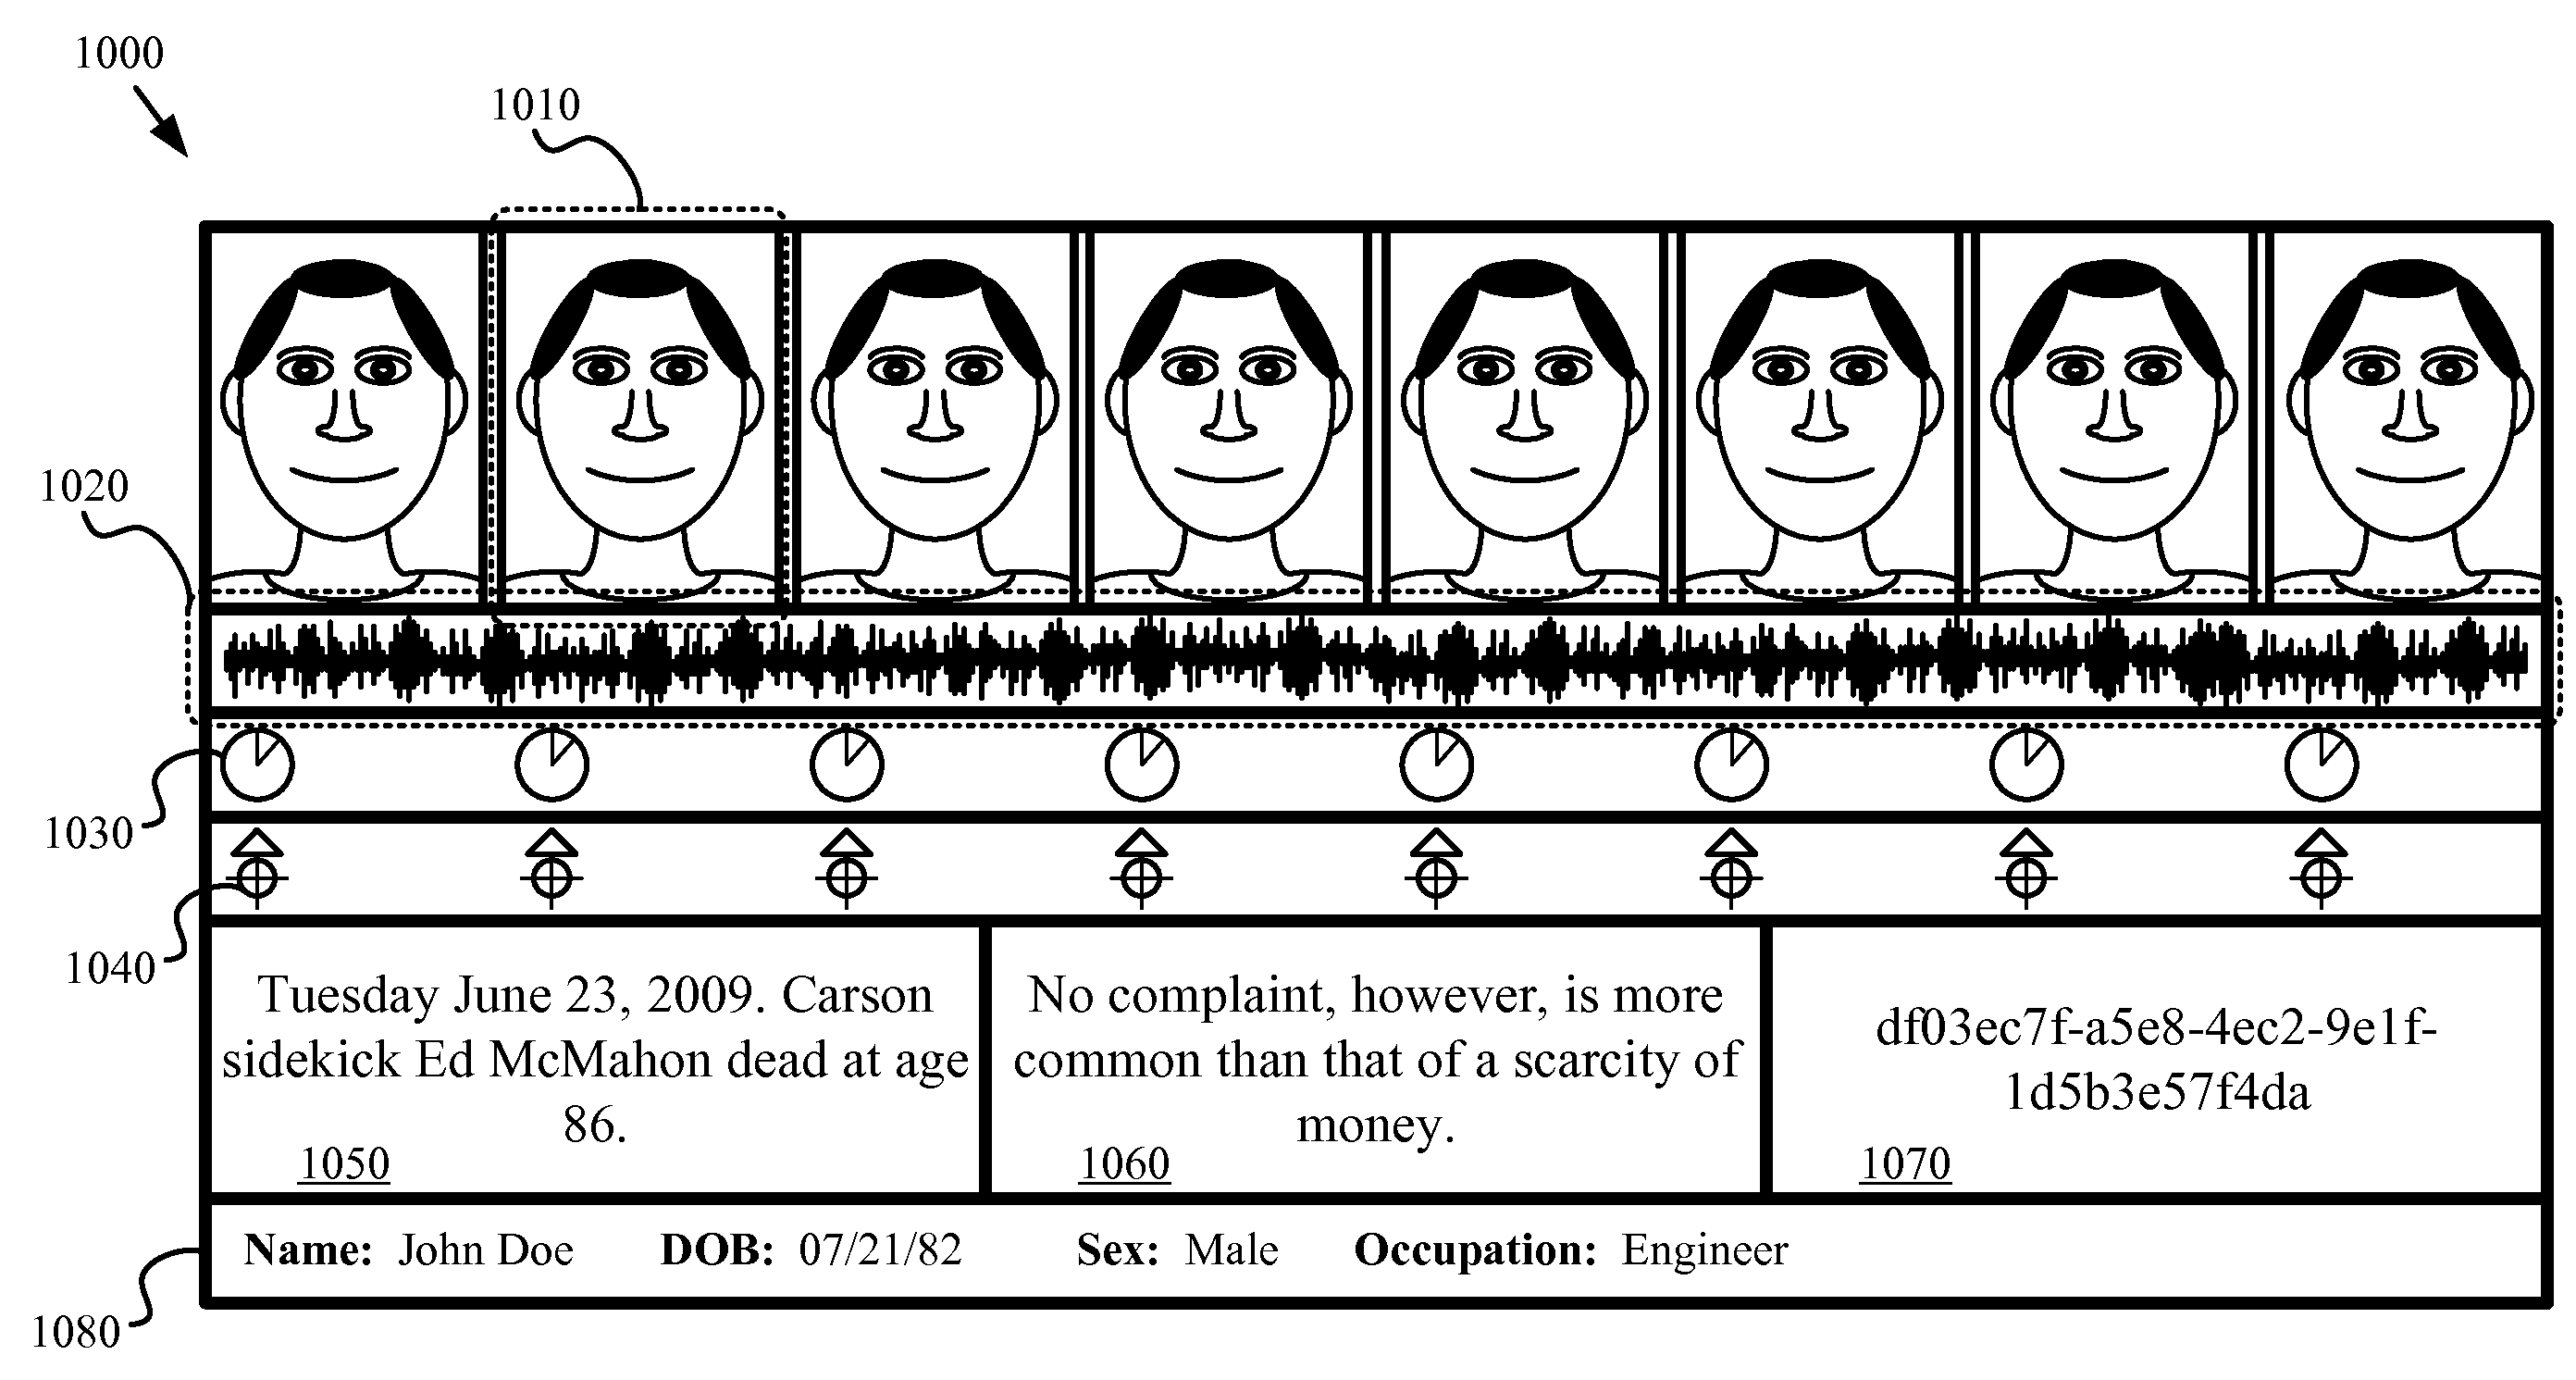 System for non-repudiable registration of an online identity